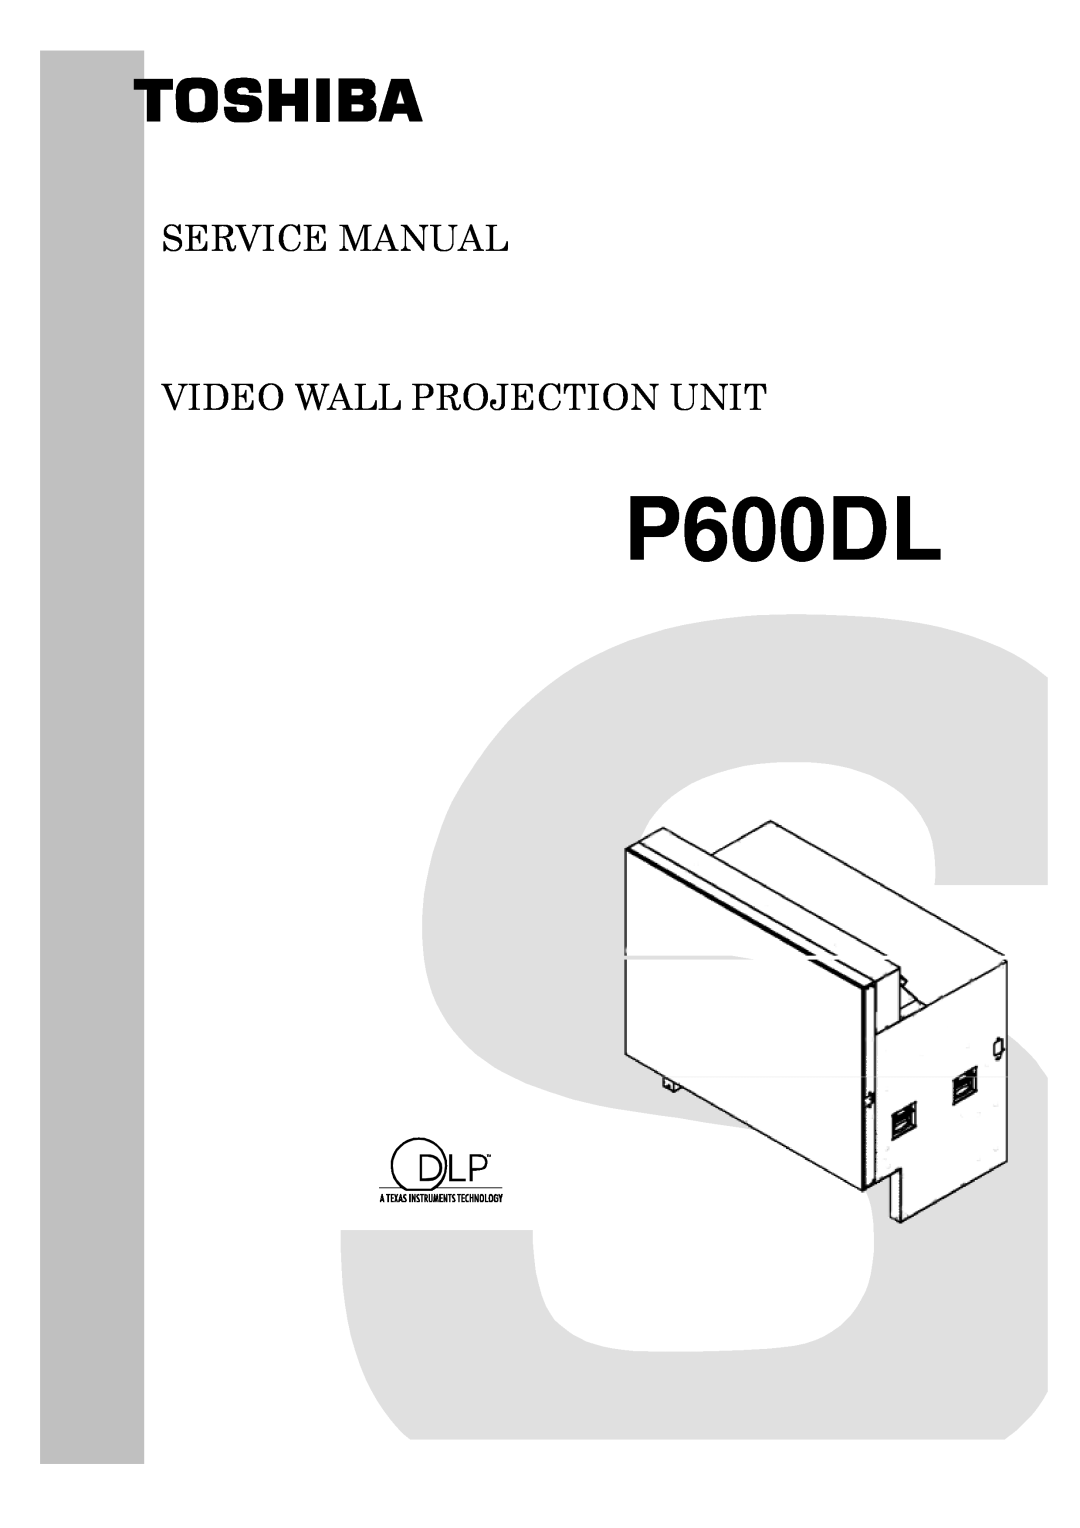 Toshiba P600DL service manual Service Manual Video Wall Projection Unit 